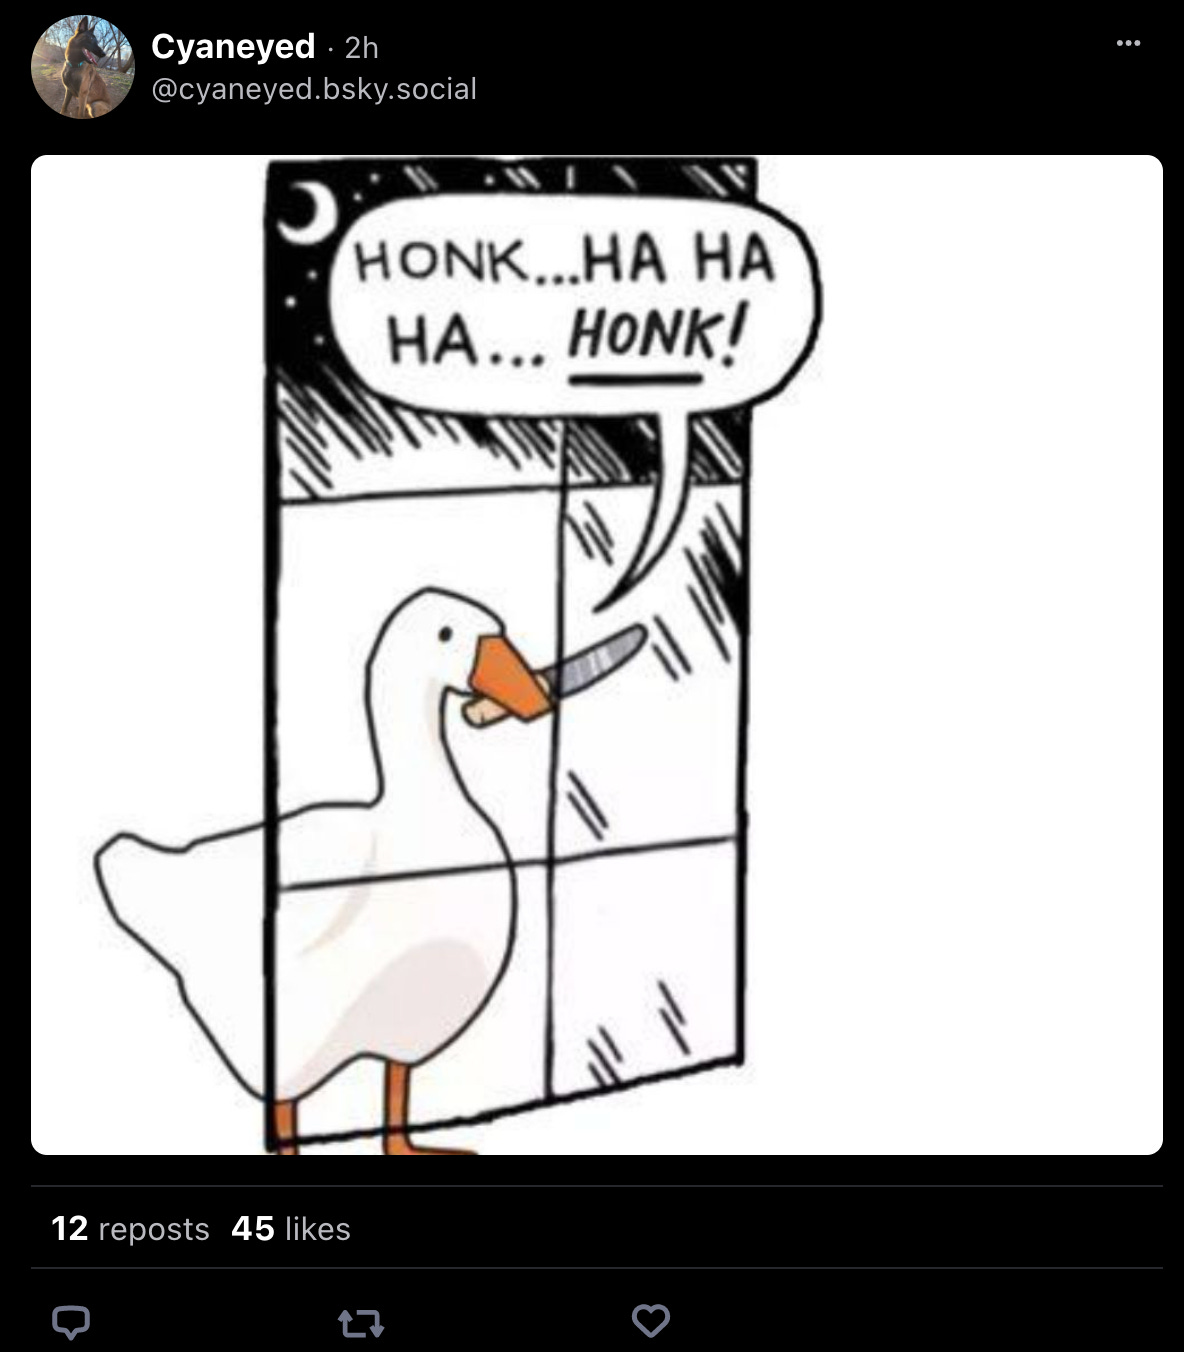 Skeet by @cyaneyed.bsky.social: image of the “Sickos” window frame, but in it is the Goose from Untitled Goose Game, holding a knife in its beak and saying “HONK…HA HA HA…HONK!”